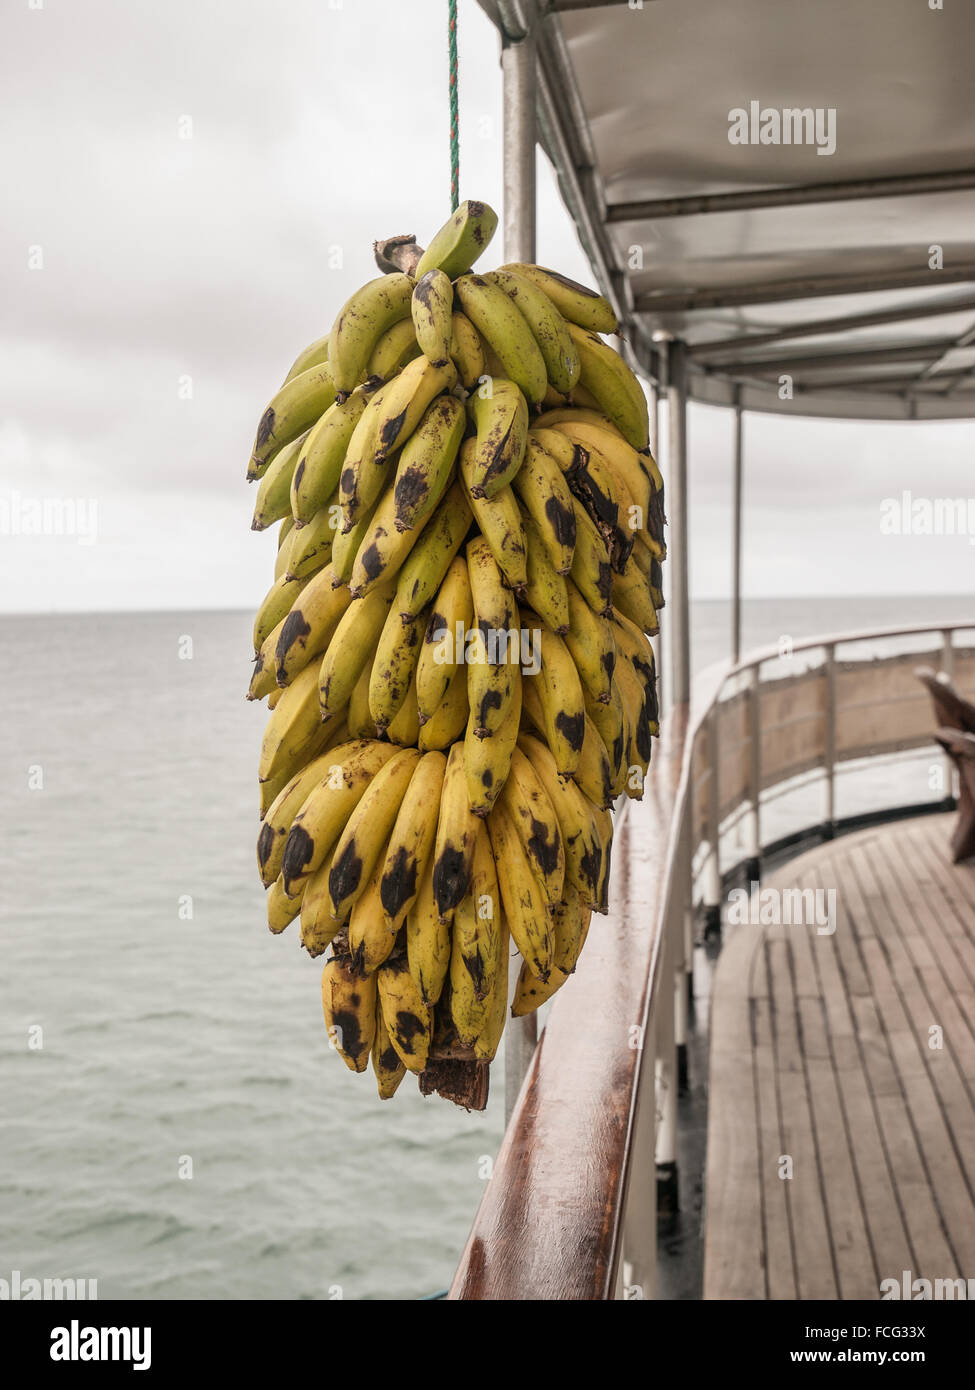 https://c8.alamy.com/comp/FCG33X/large-bunch-of-ripe-hanging-bananas-on-the-side-of-a-boat-out-to-sea-FCG33X.jpg